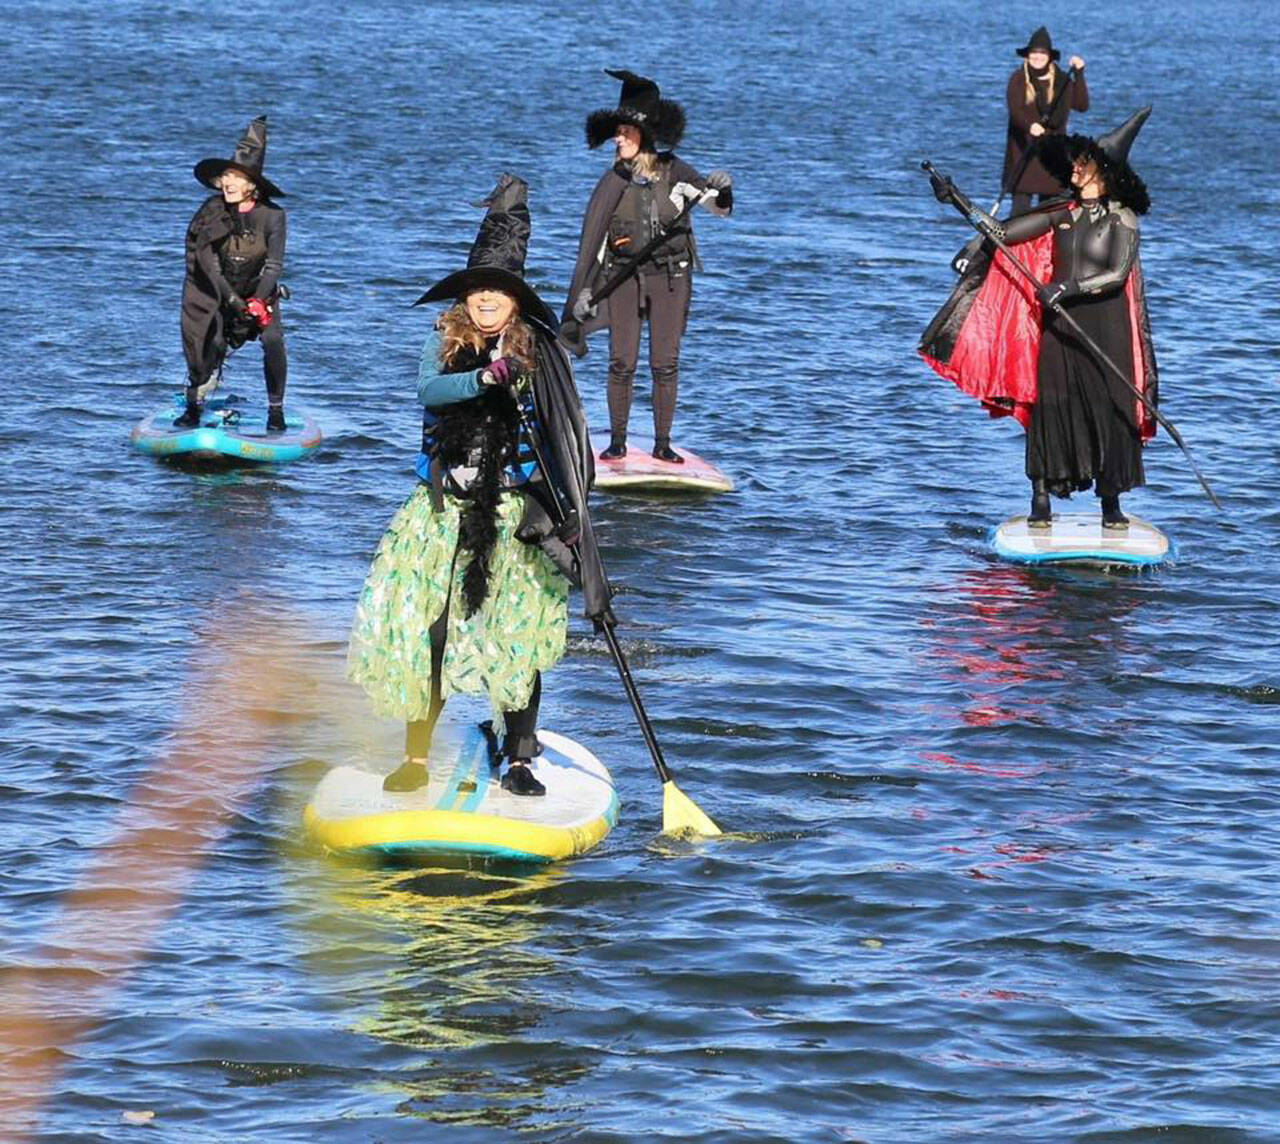 Vashon’s 2nd annual Witches’ Paddle, from 1 to 3:30 p.m. Saturday, Oct. 29, at Jensen Point Beach or Raab’s Lagoon, depending on conditions (Photo 2nd Annual Vashon Witches’ Paddle Facebook).